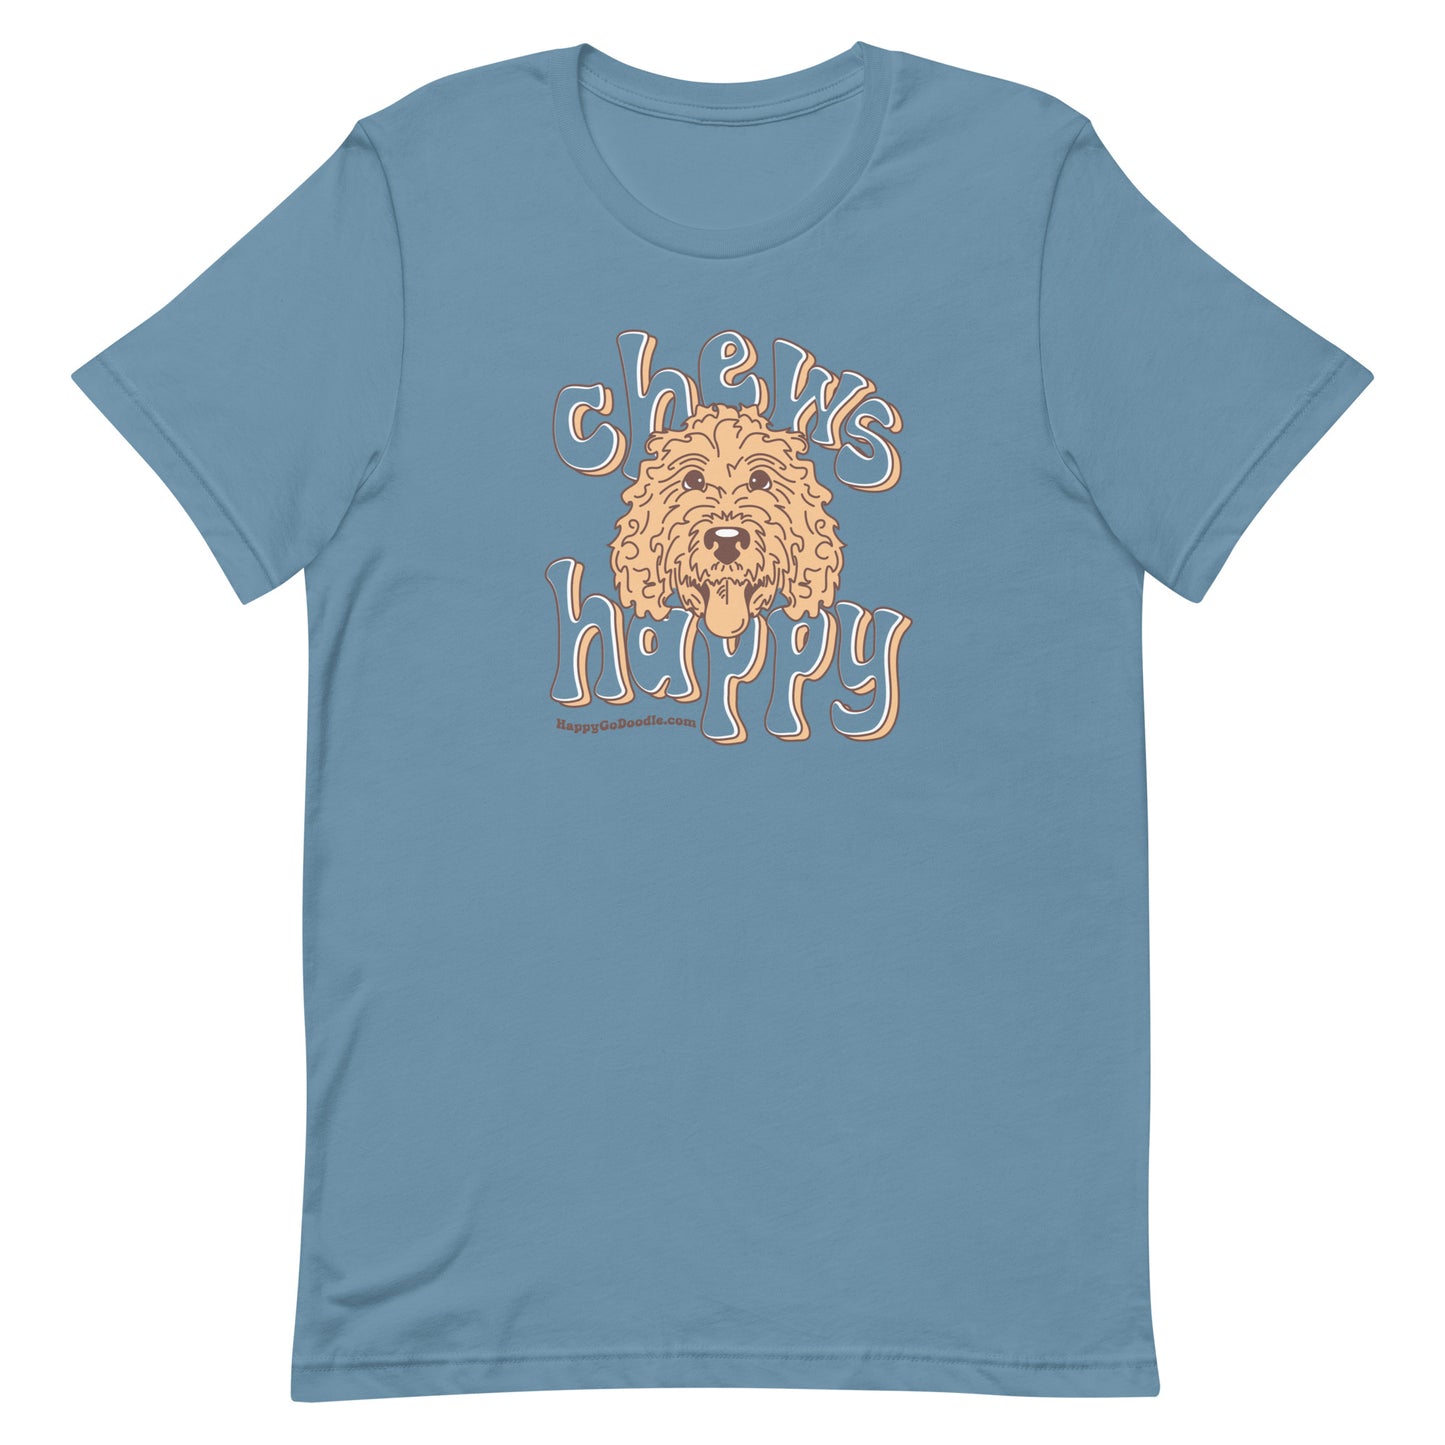 Goldendoodle crew neck sweatshirt with Goldendoodle face and words "Chews Happy" in steel blue color